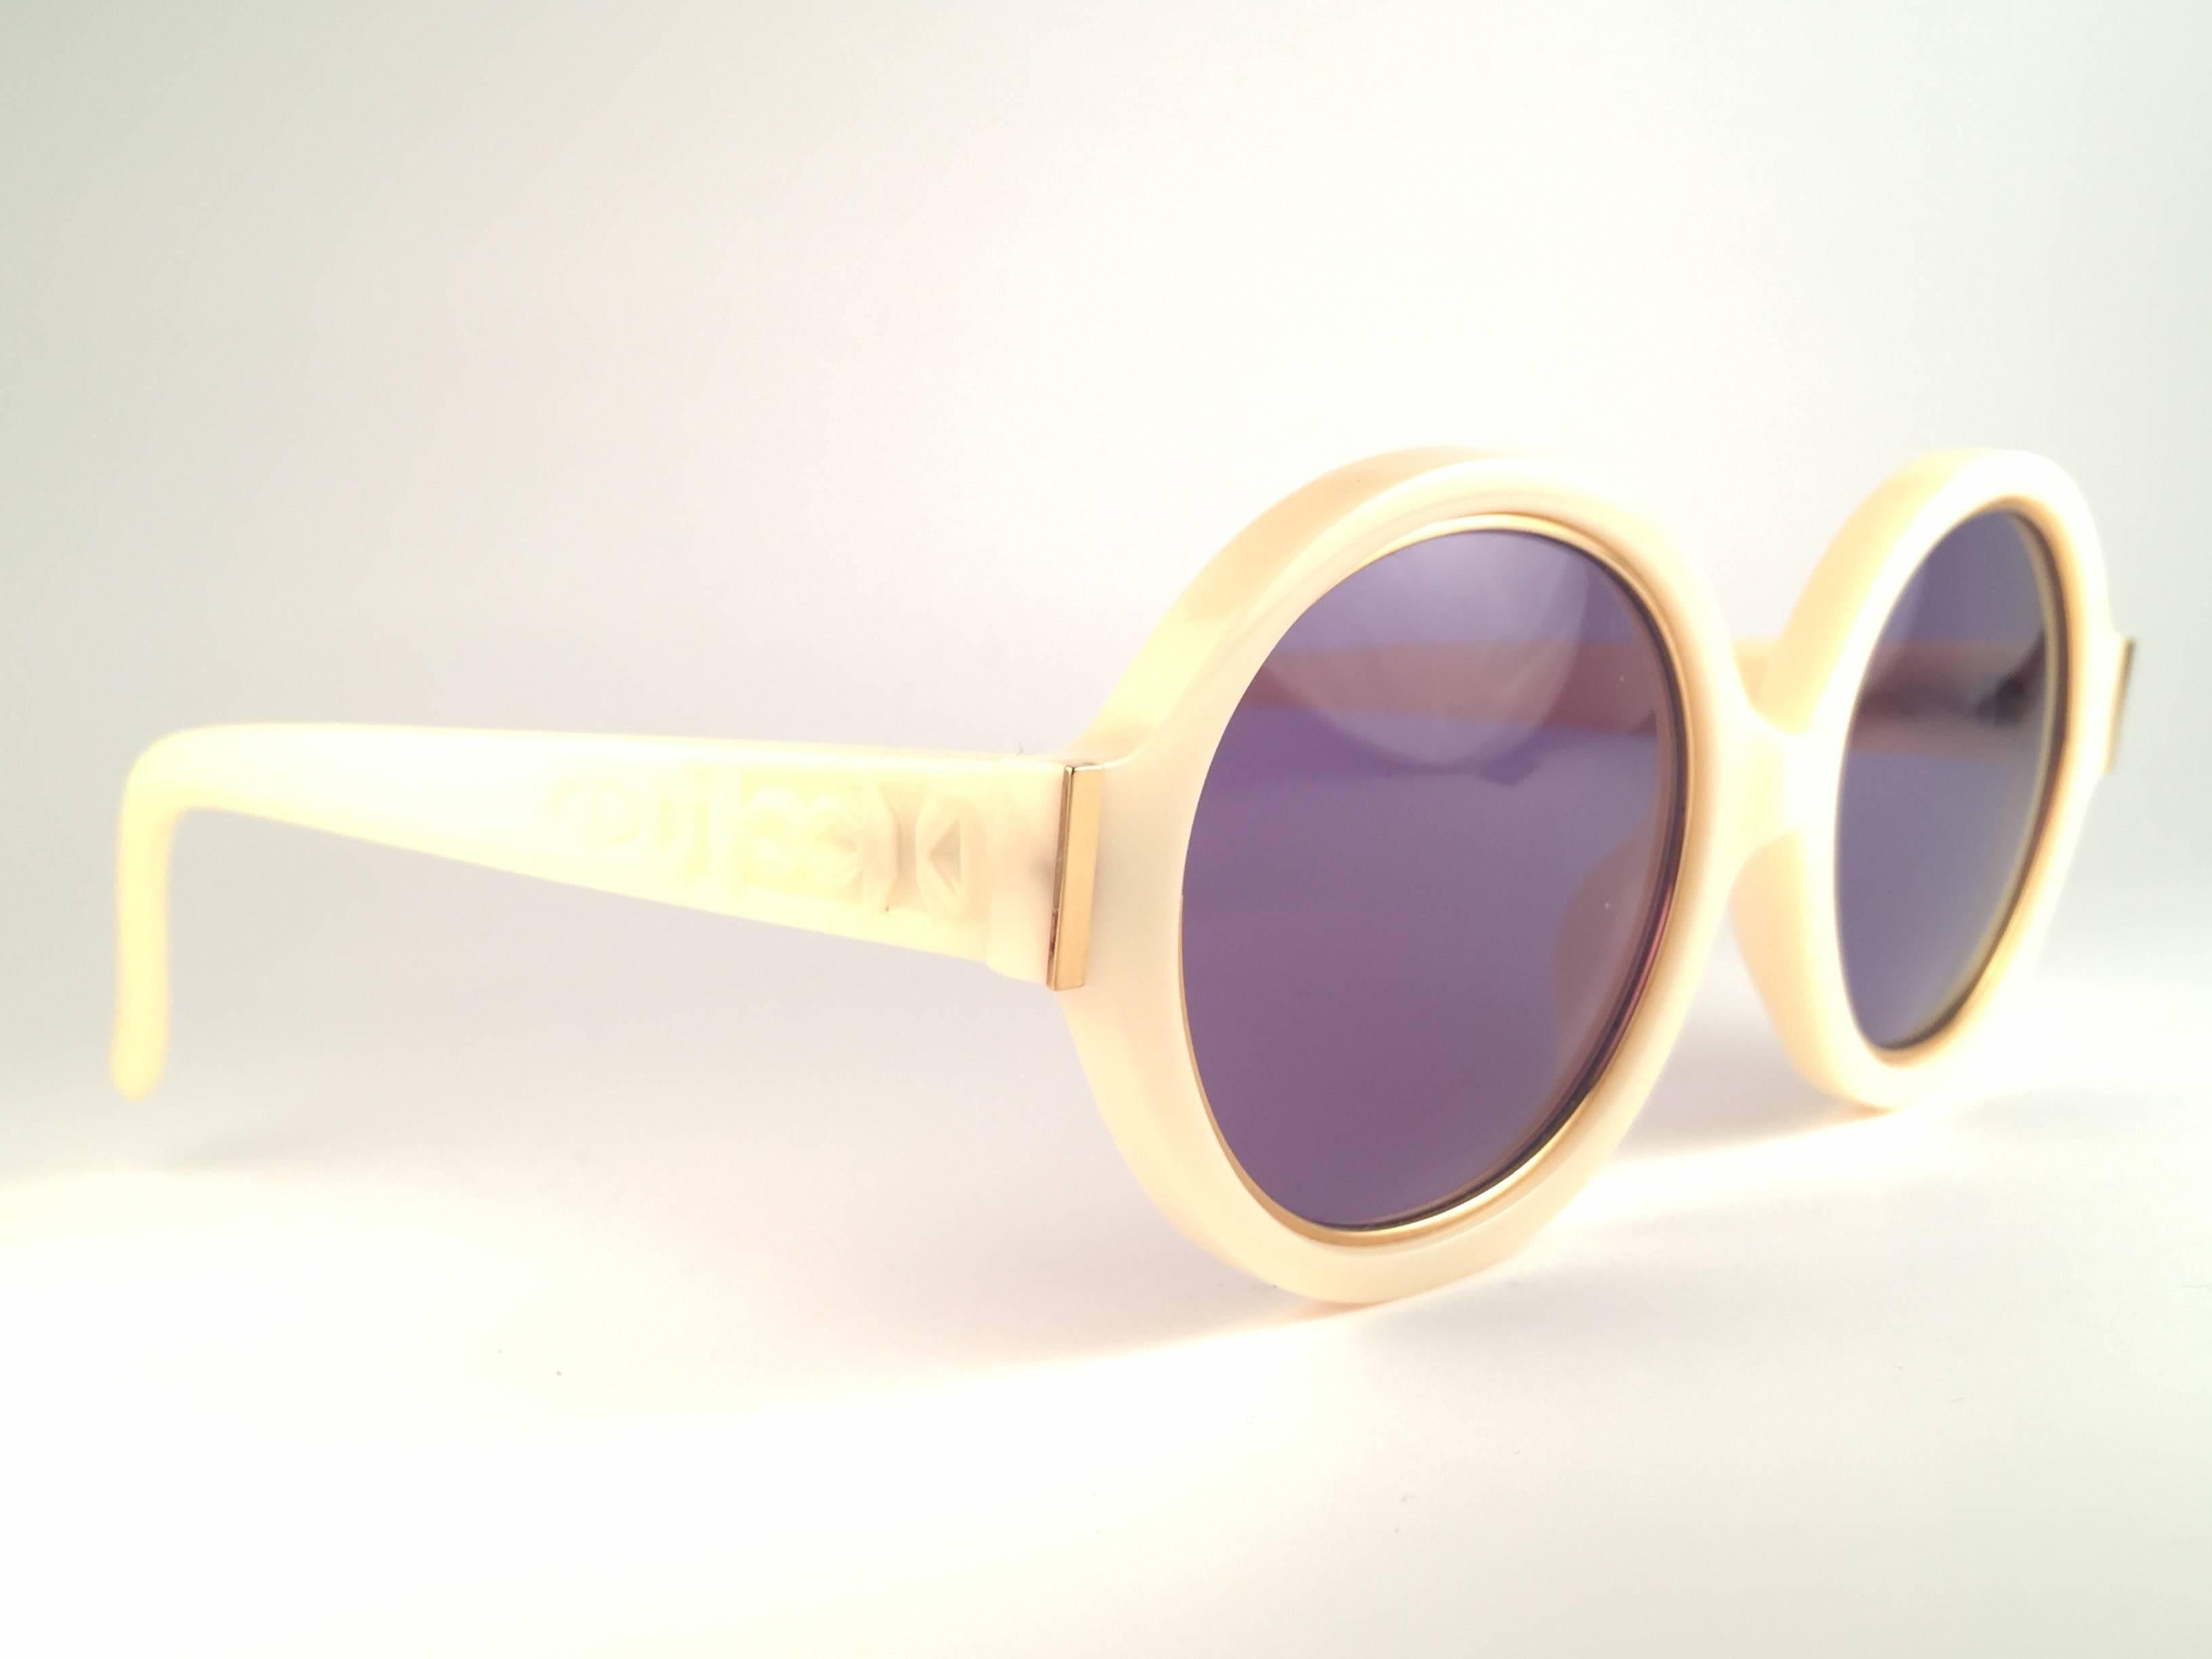 Vintage Christian Dior 2446 70 Beige with gold inserts frame sporting spotless lenses. 

Made in Germany.
 
Produced and design in 1970's.

A collector’s piece!

Comes with its original silver Christian Dior Lunettes sleeve. This  item show minor